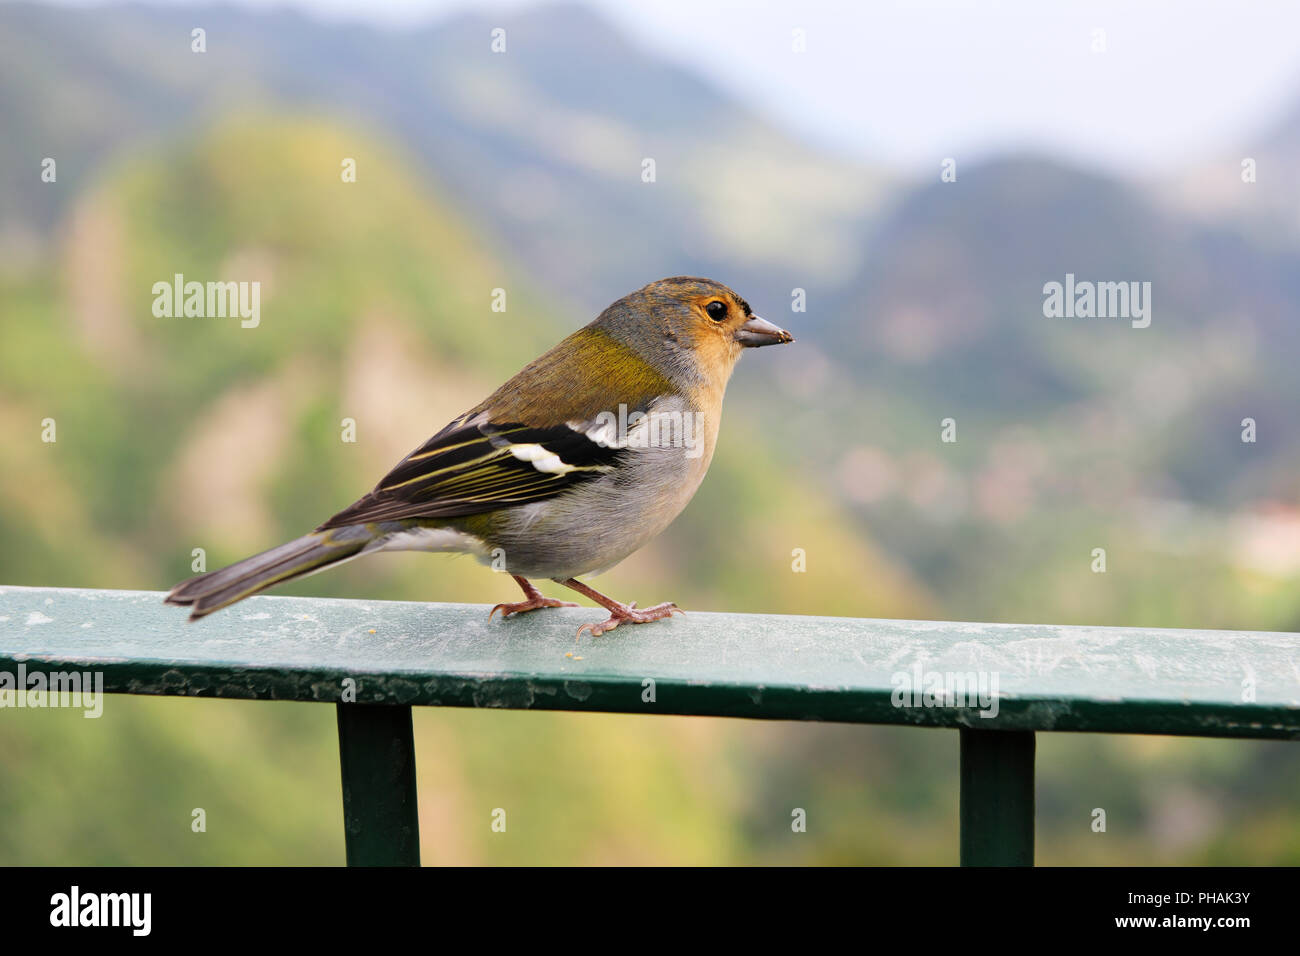 Finch. Madeira Nature Park, Portugal Stock Photo